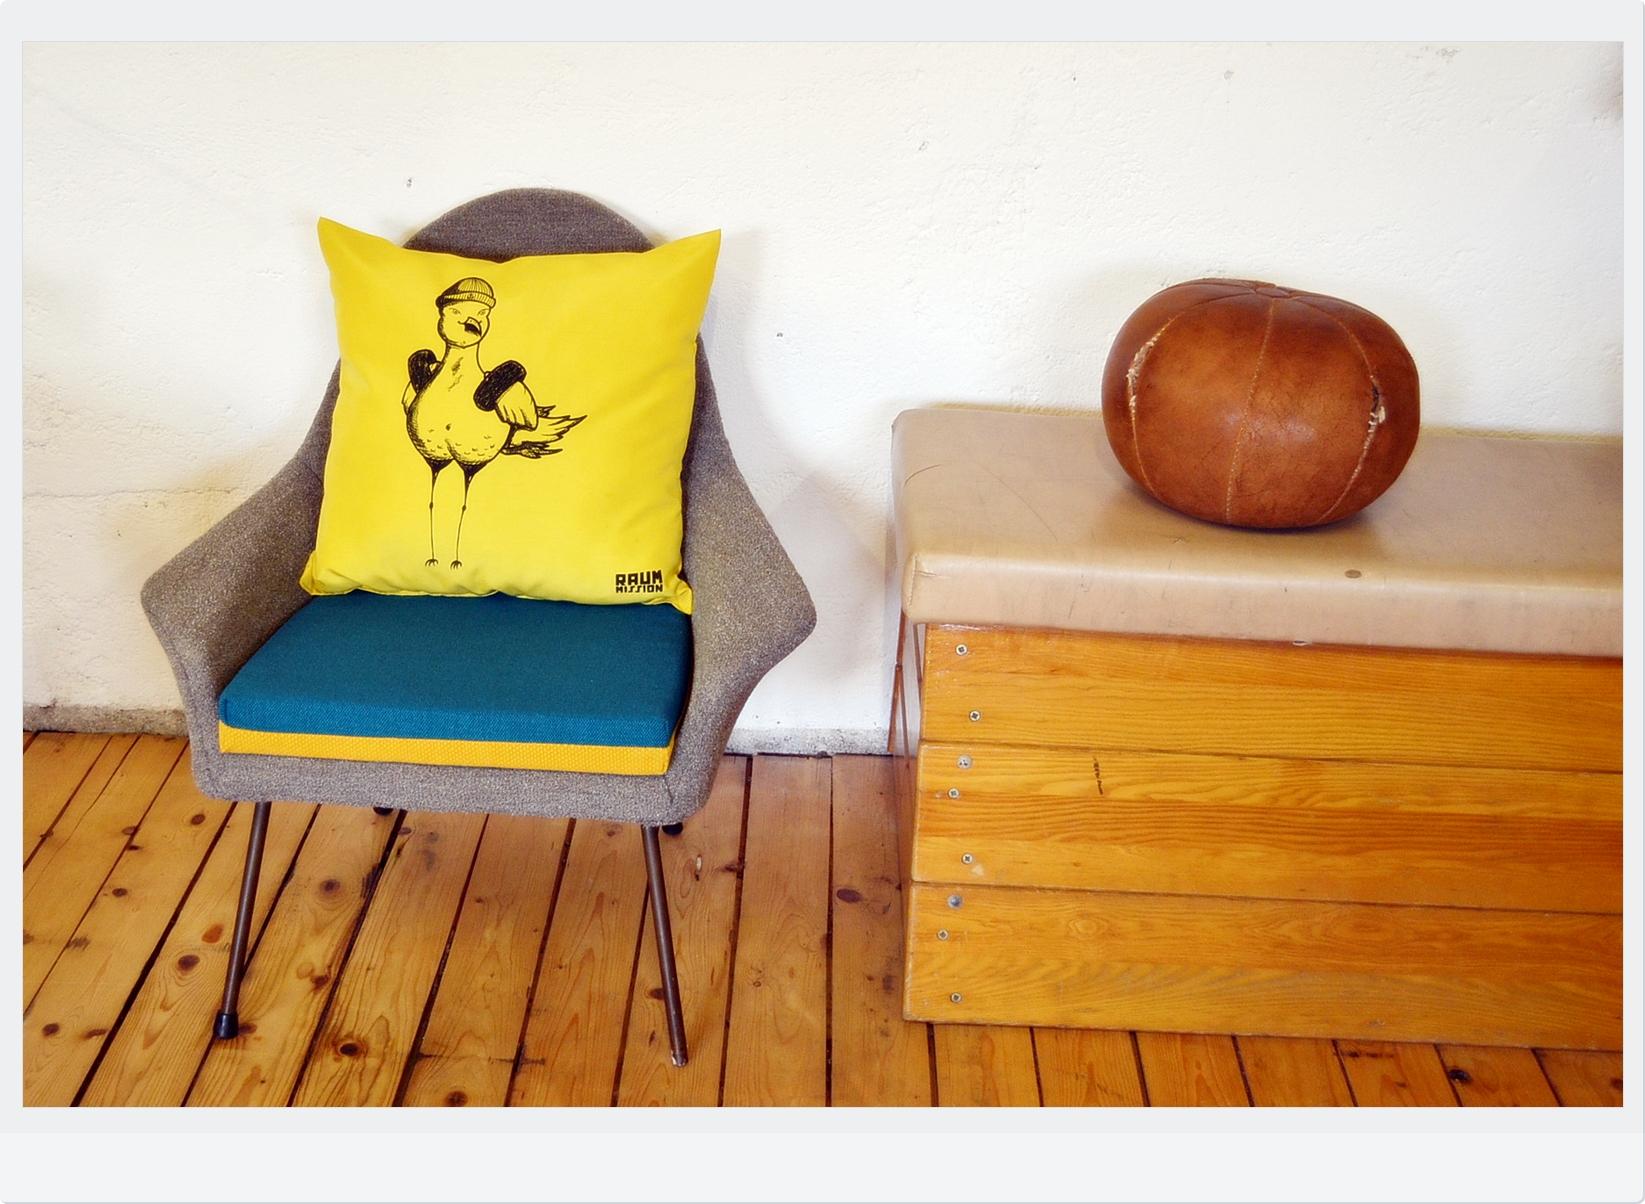 Vintage Sessel Upcycling #sessel #kissen #grauersessel #upcycling ©Raummission